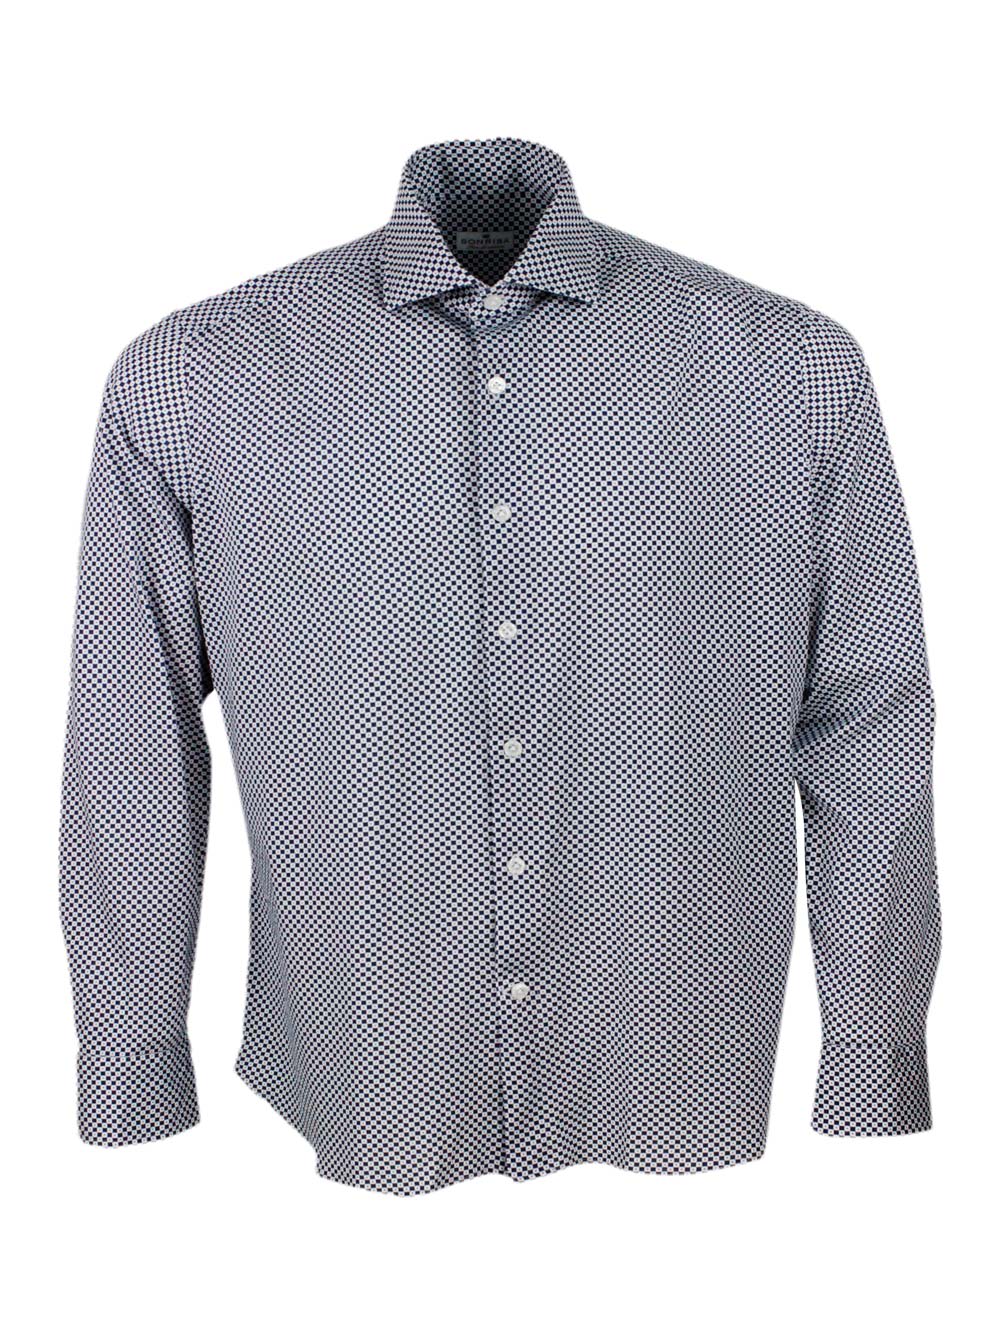 Luxury Shirt In Soft, Precious And Very Fine Stretch Cotton Flower With French Collar In A Small Geometric Checkered Design Print